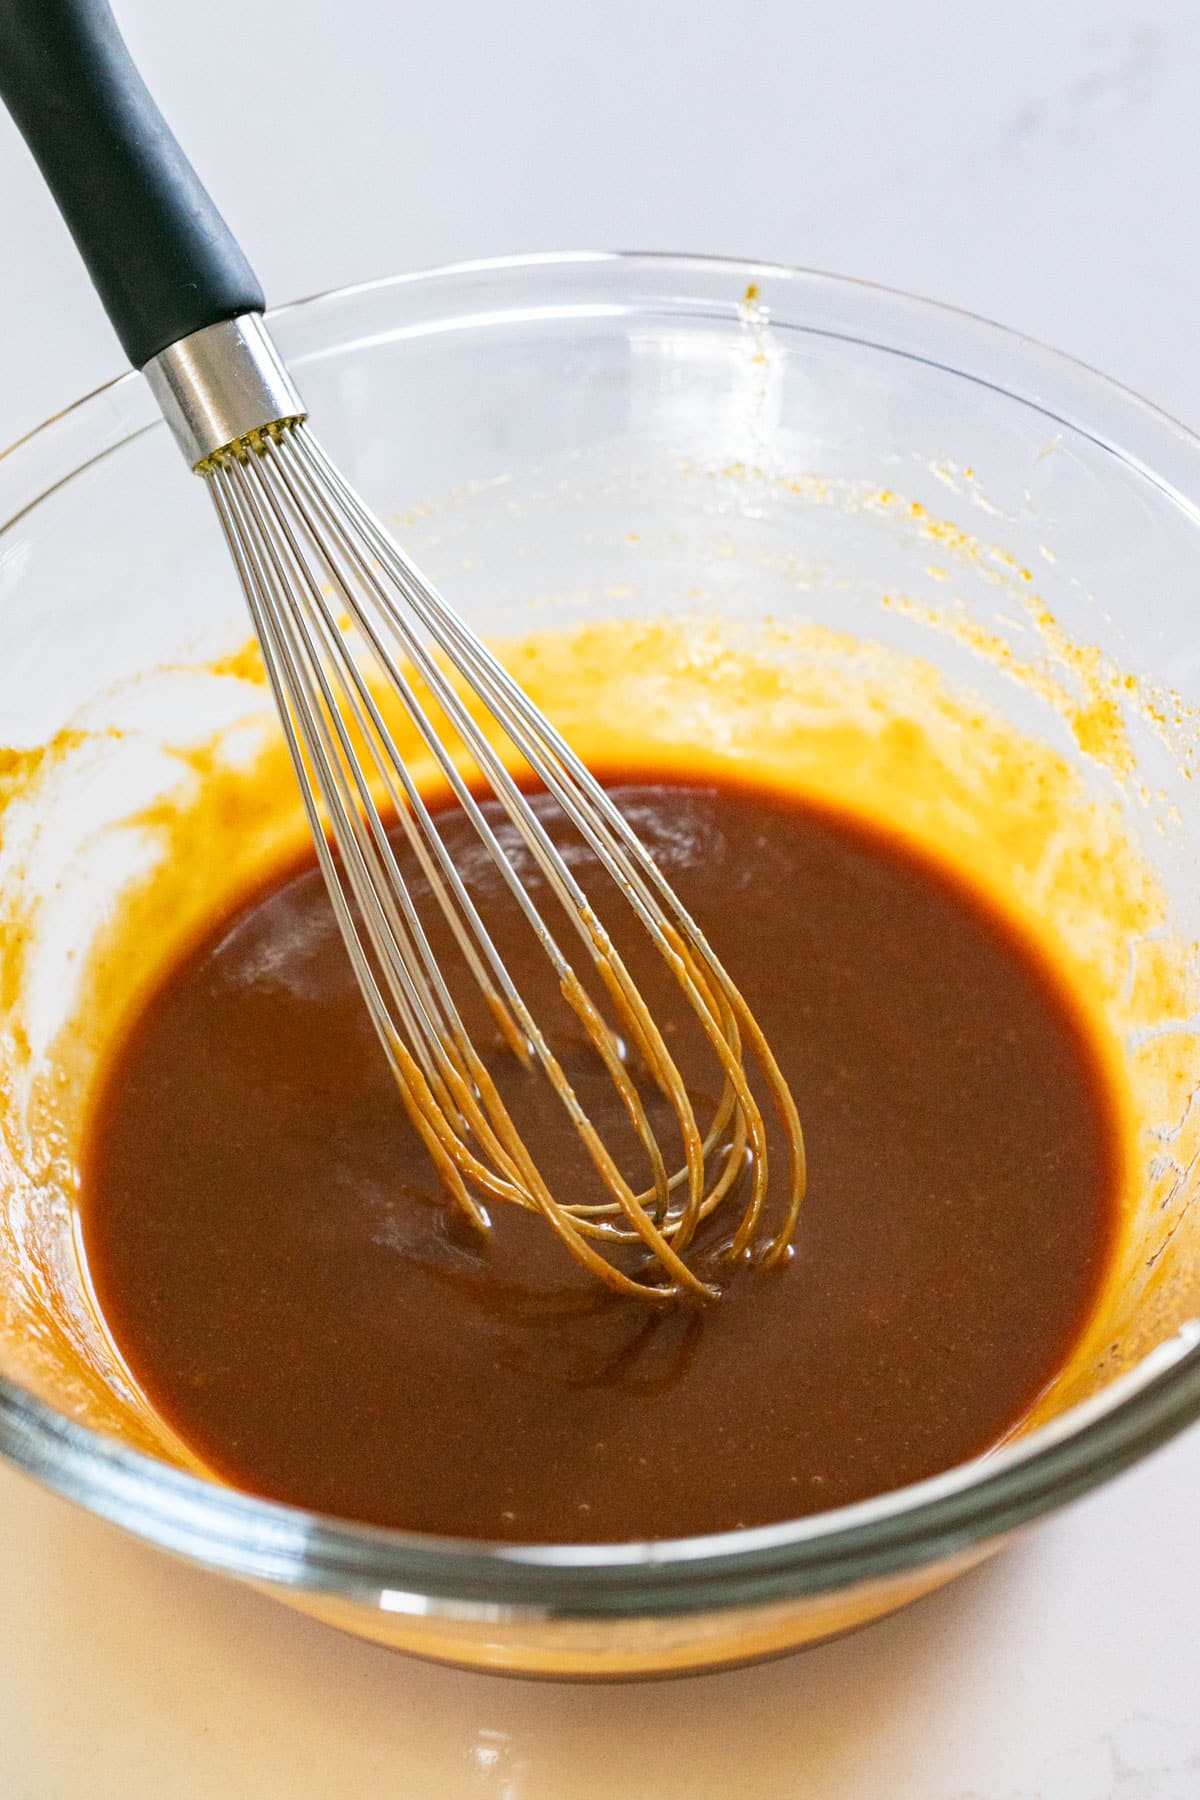 Asian salad dressing recipe in a glass bowl with a whisk in it.